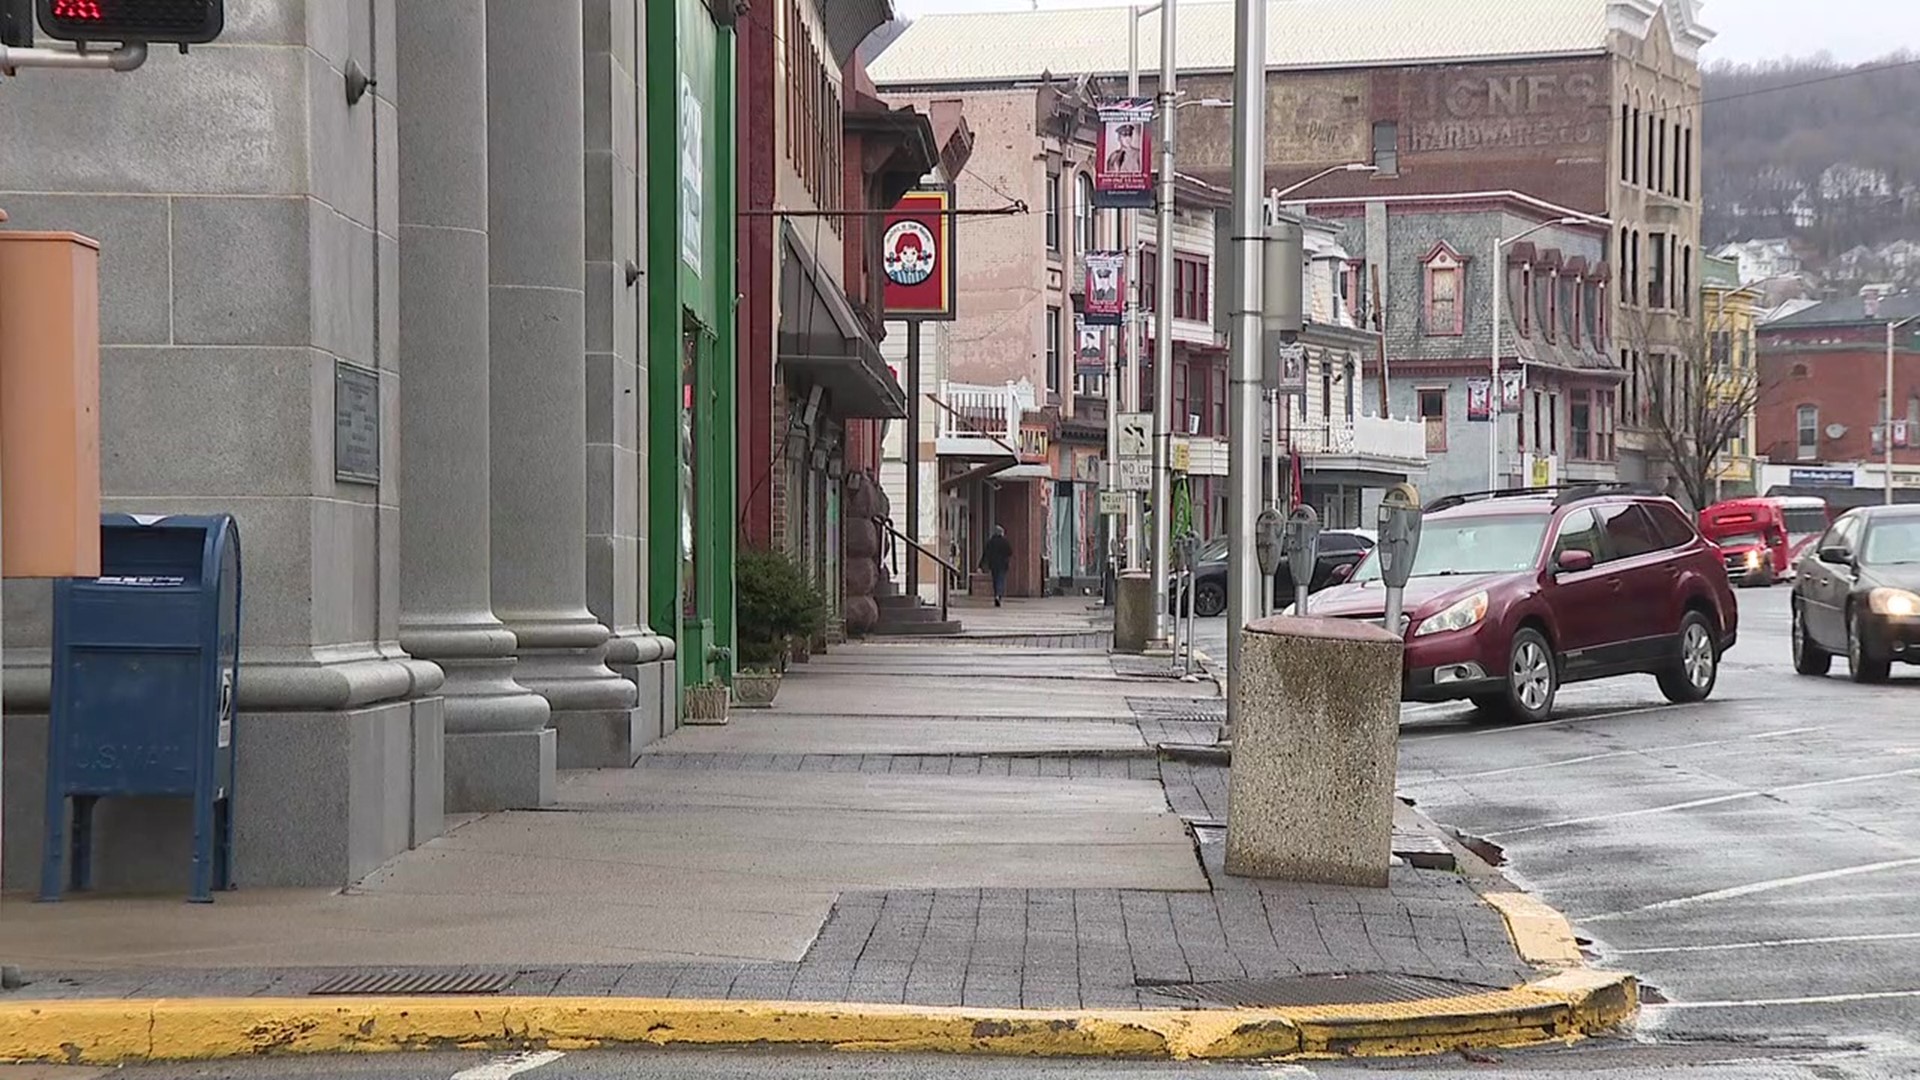 The city of Shamokin is receiving more than $2.5 million for improvements.